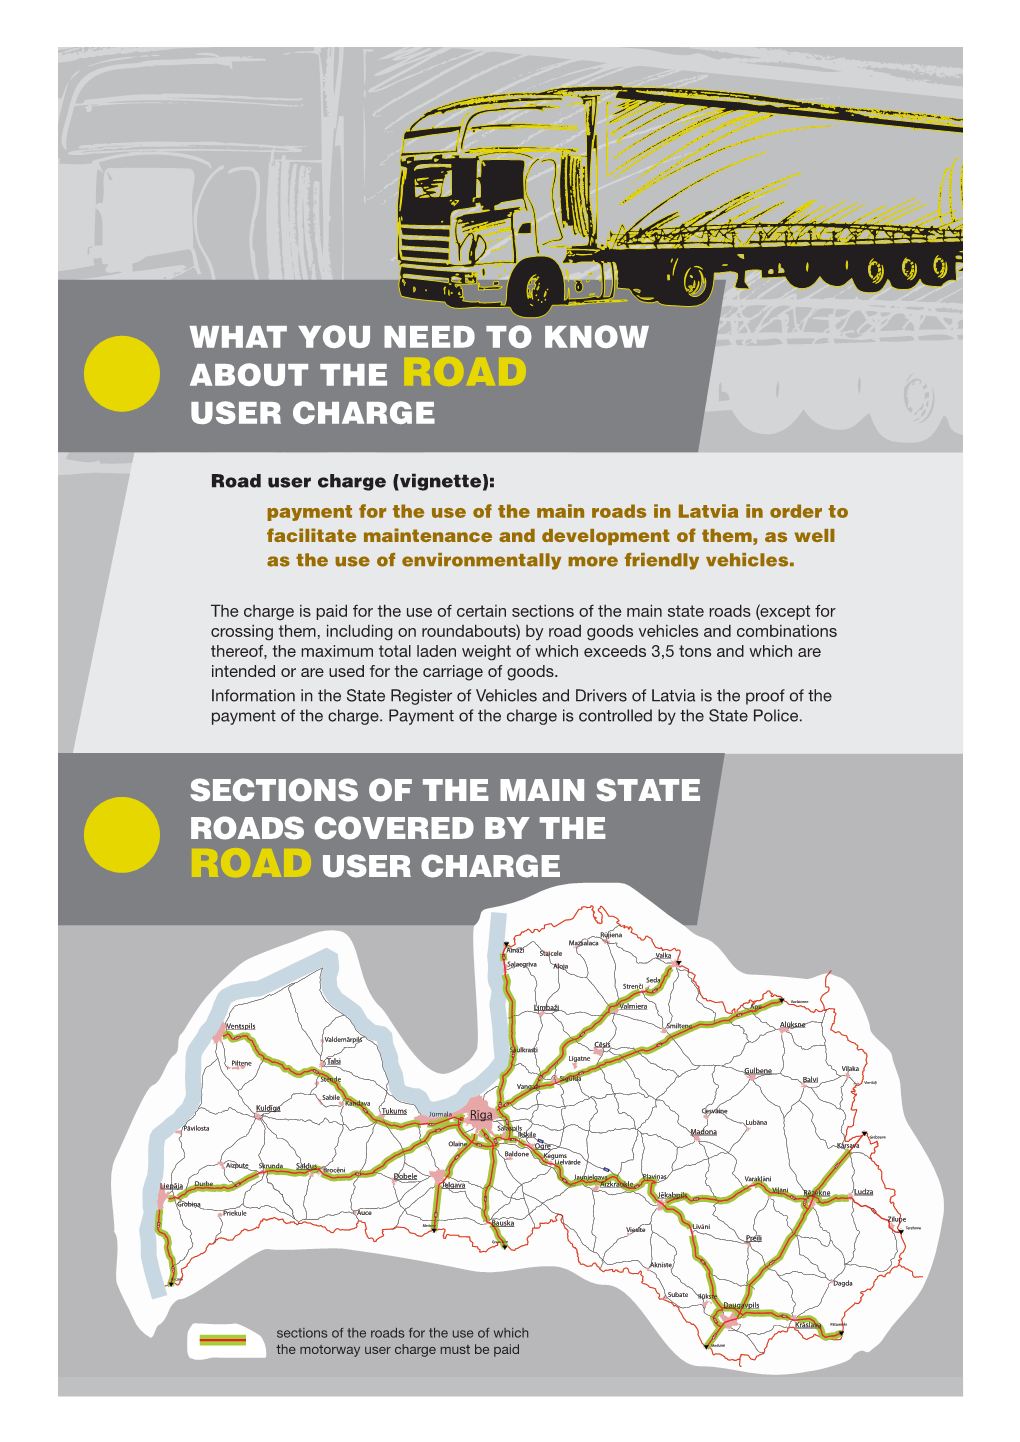 What You Need to Know About the Road User Charge